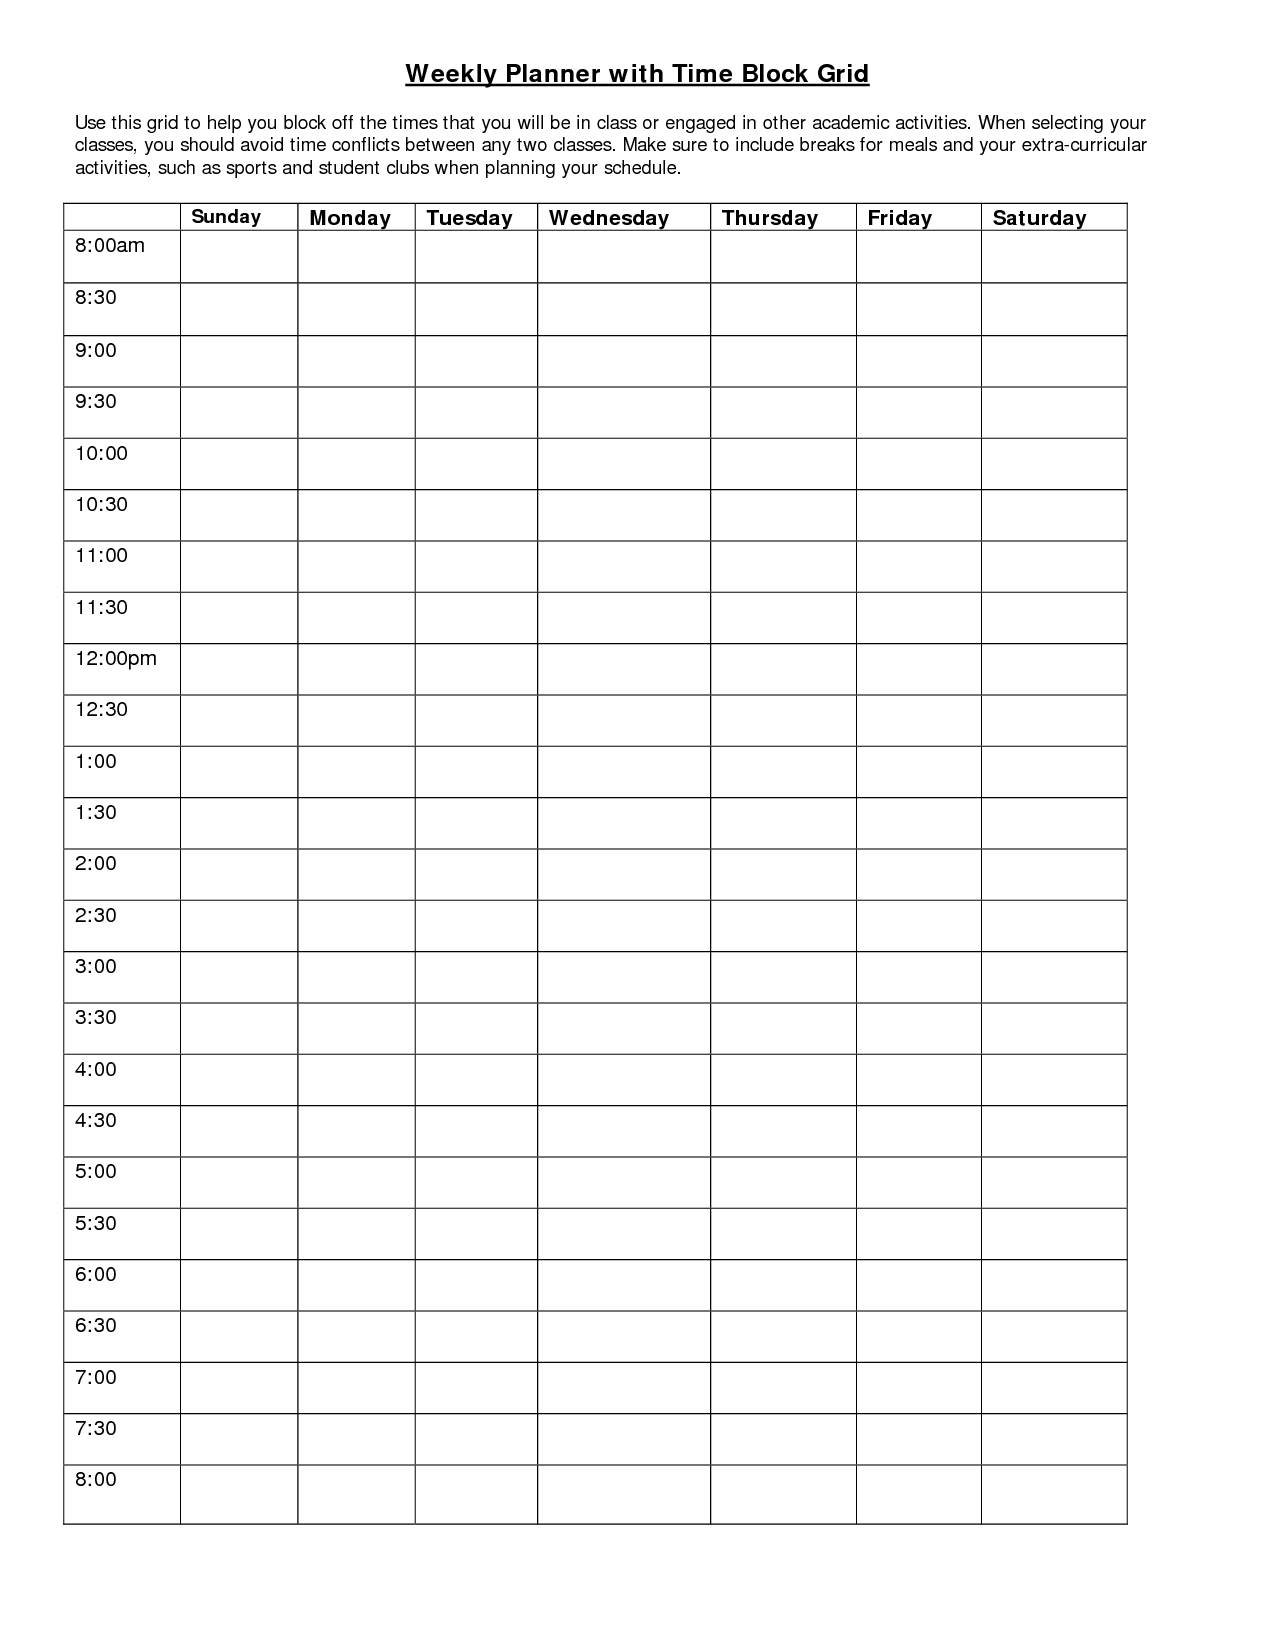 Weekly Planner With Time Block Grid | Good Ideas | Pinterest 7 Day Calendar Grid Templates